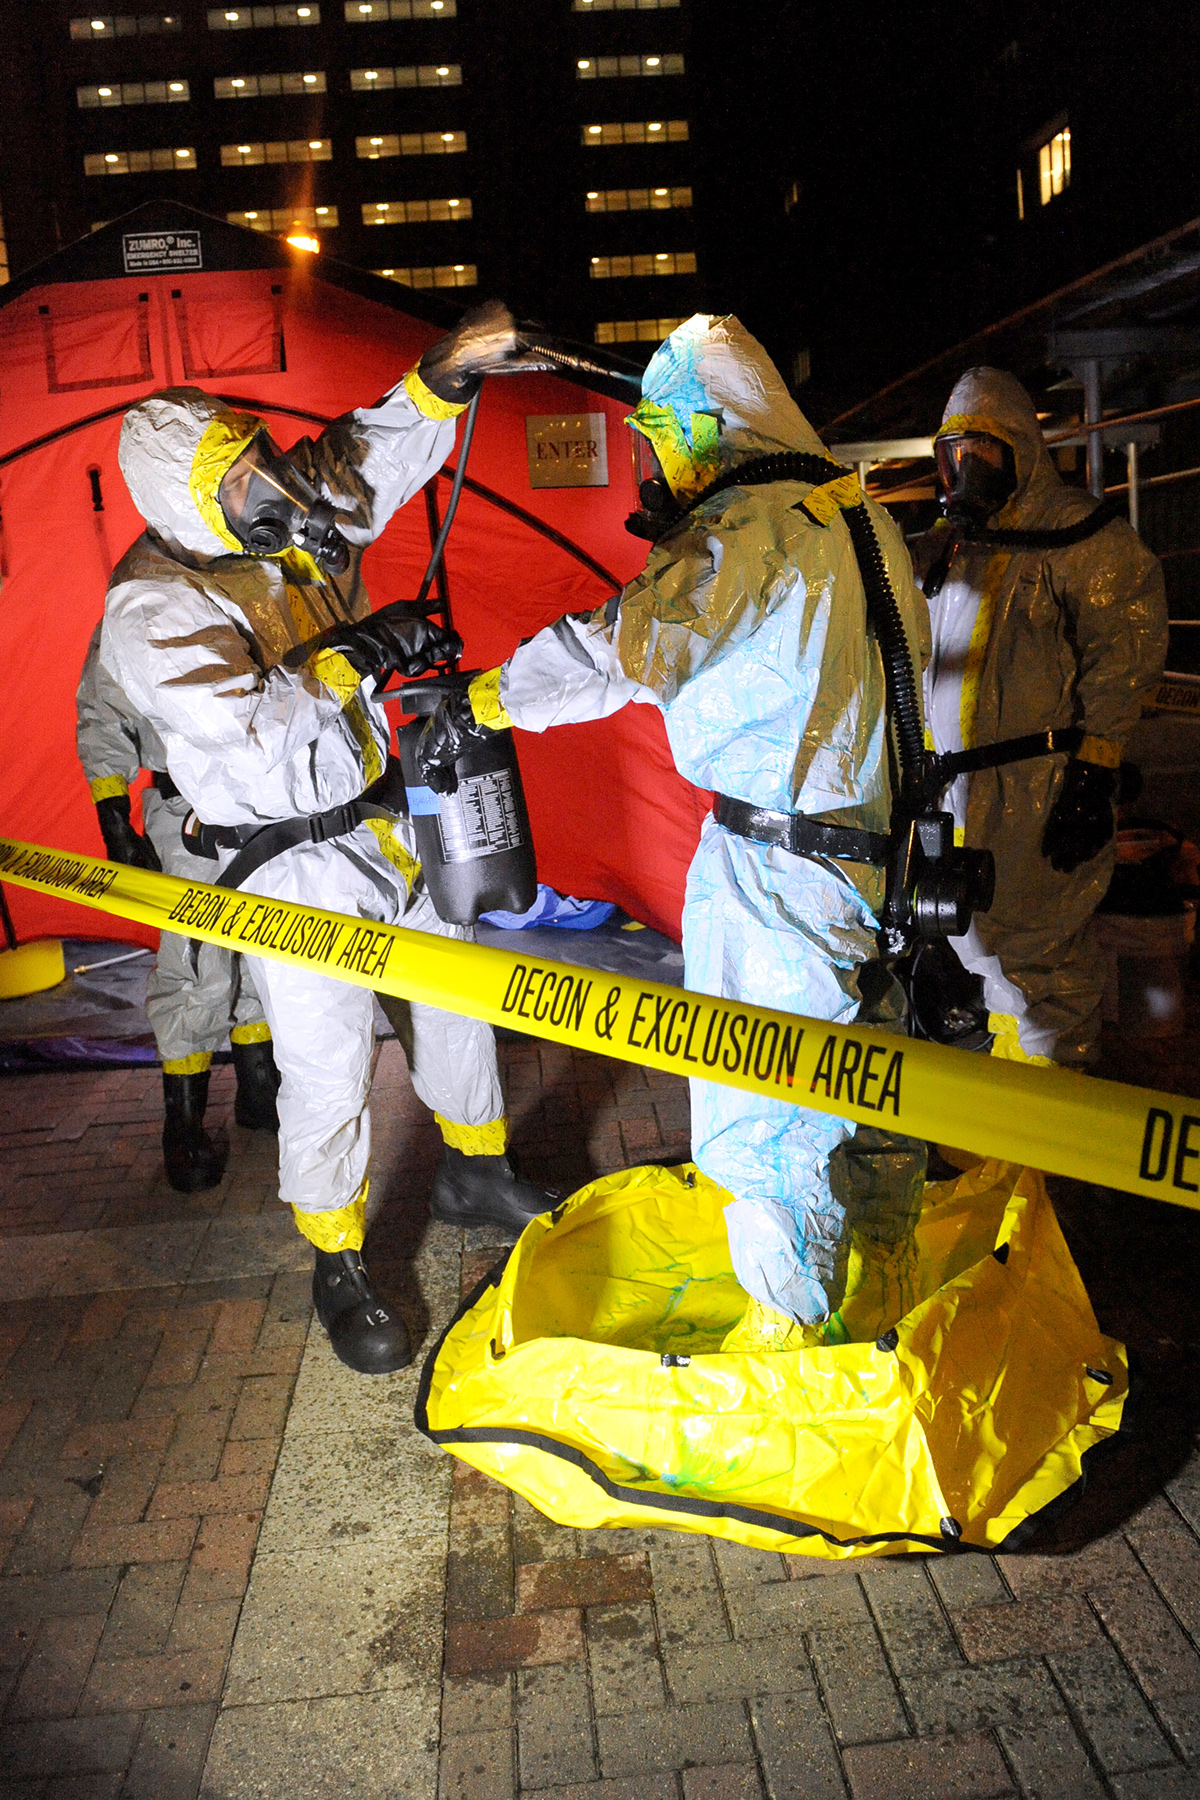 A healthcare worker is spraying another worker in a hazmat suit with bleach that includes Highlight.